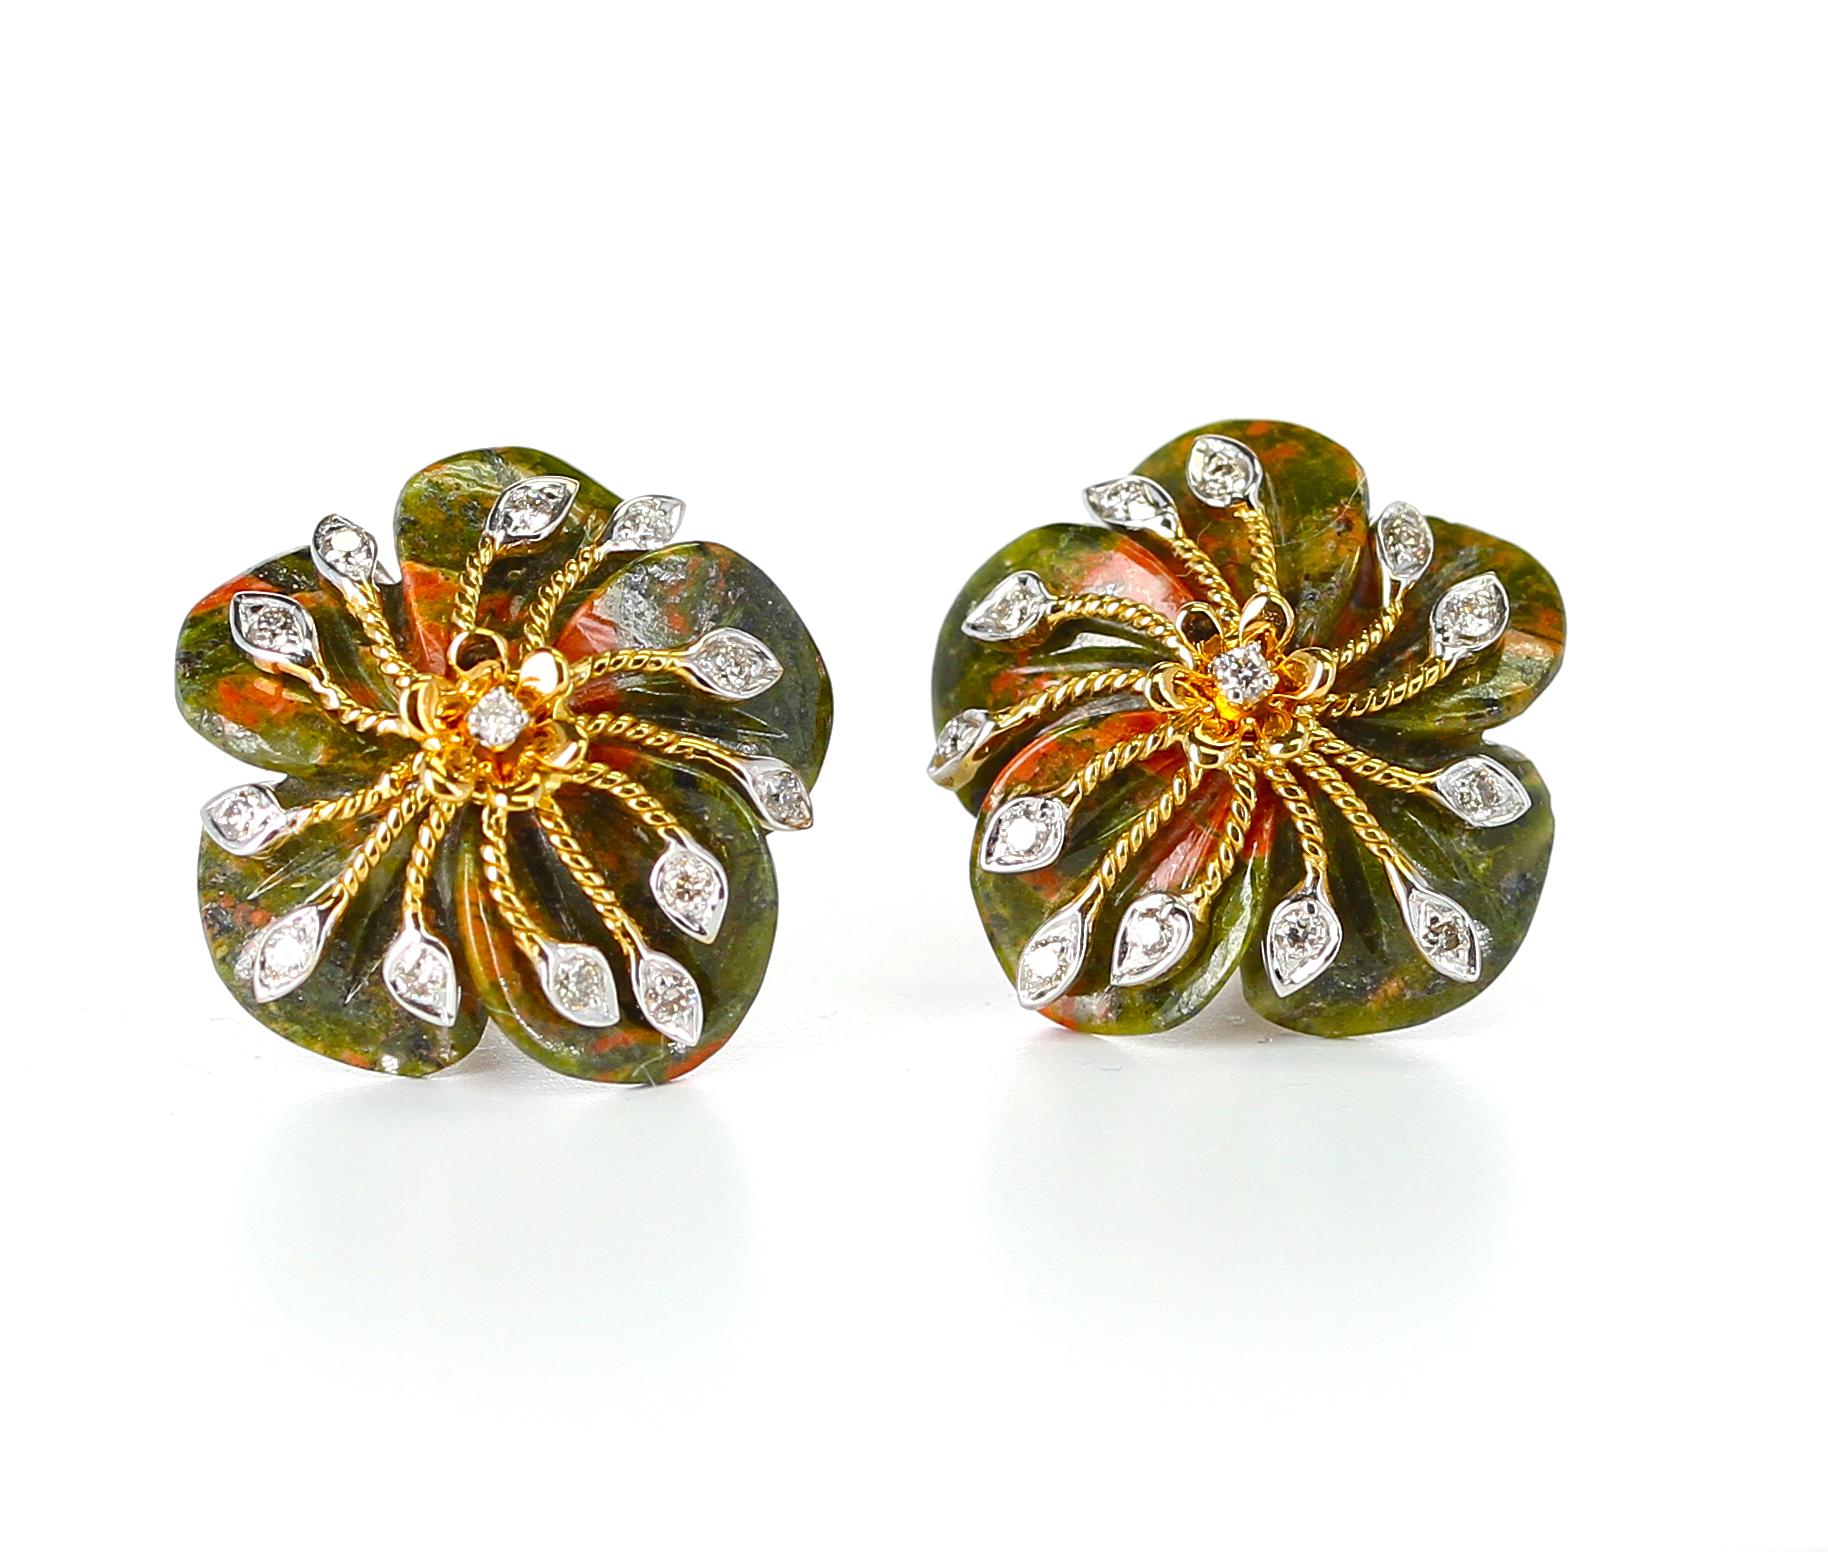 A blended color of green and orange in Carved Unakite Earrings with Diamonds, 14K Gold, Diamond Weight: 0.23 carats, Unakite: 16.45 carats, Length:  ¾” Metal type and stones can be customized. 